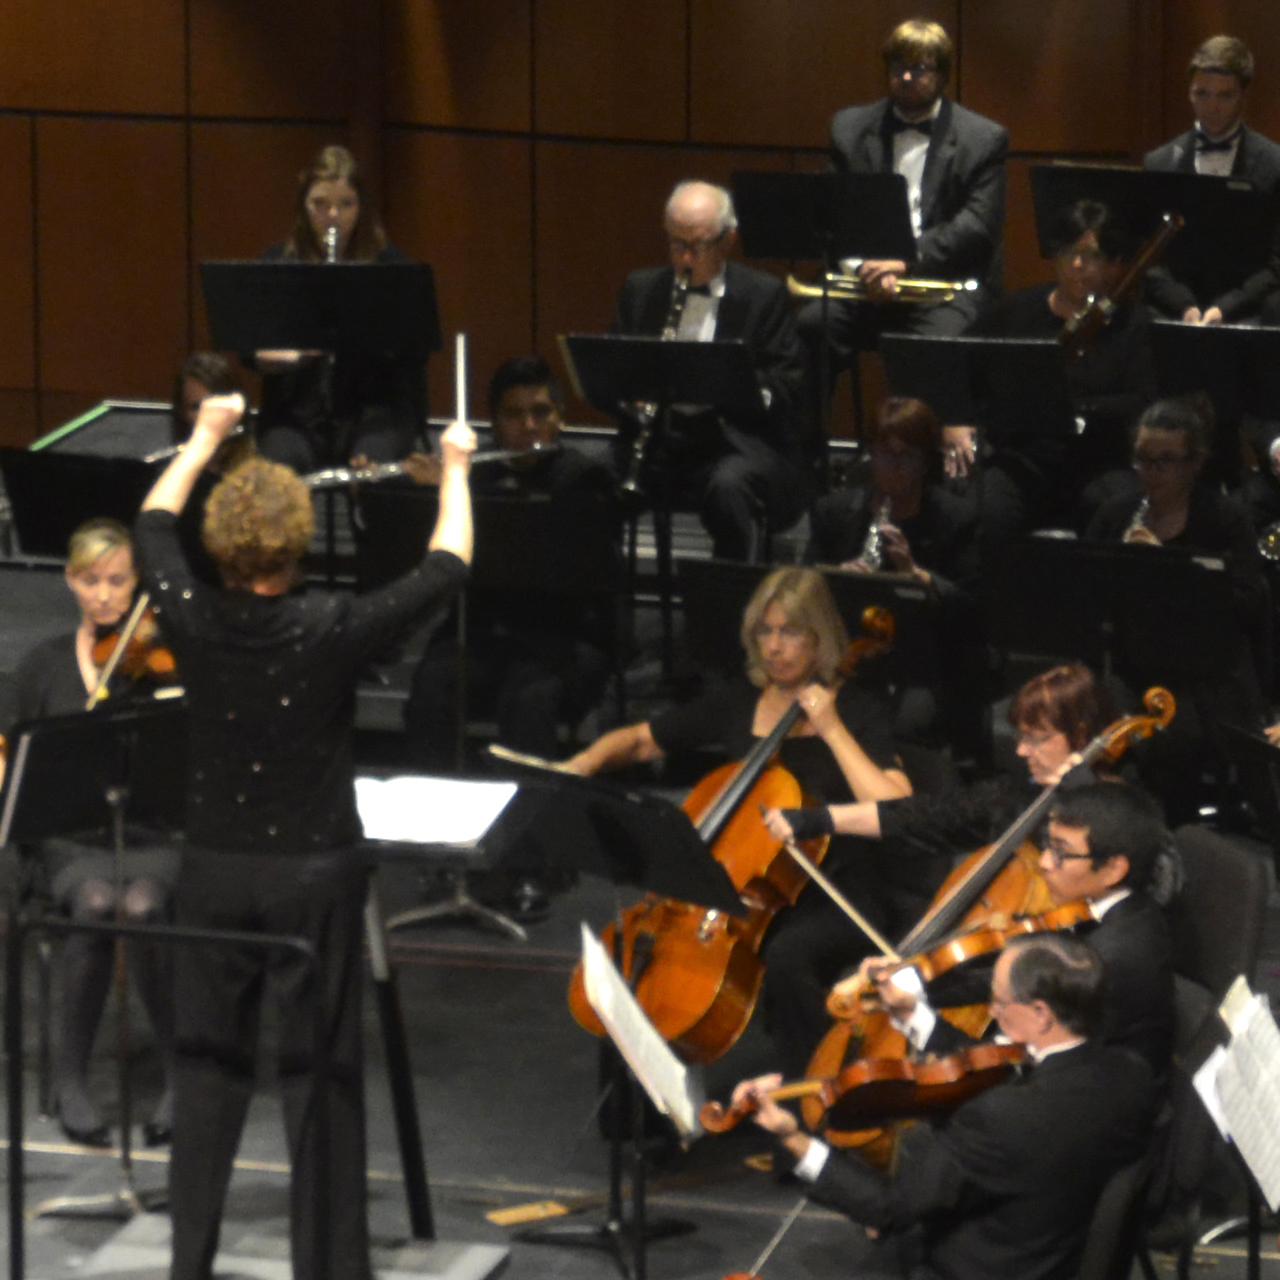 The Palomar Symphony Orchestra opens with "Suite from Water Music" by Handel in the first concert of the water themed concert season. (Telescope Staff/The Telescope)